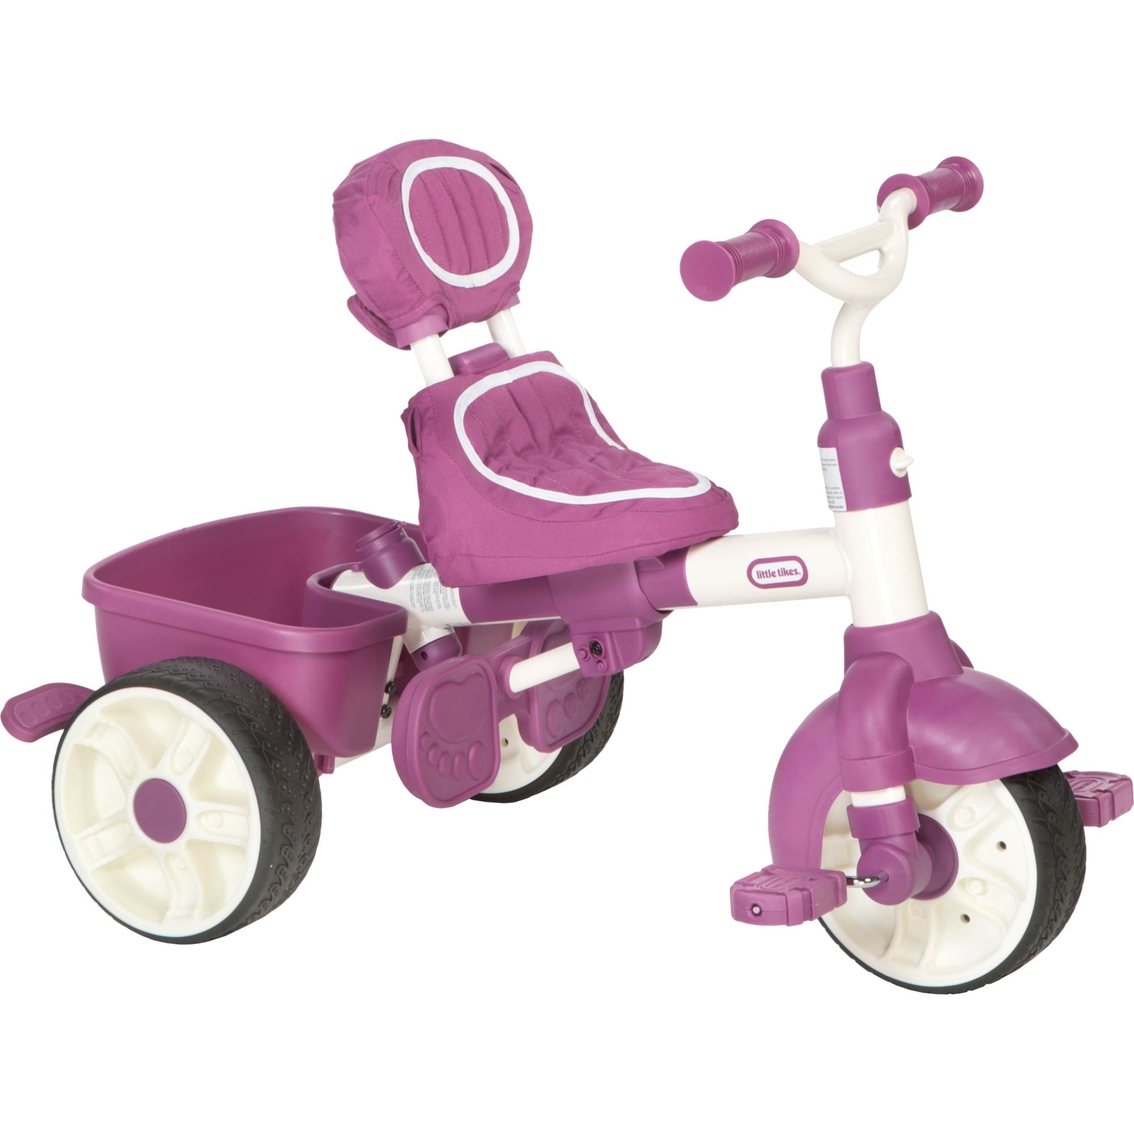 Little Tikes 4 in 1 Sports Edition Trike, Pink - Image 4 of 4